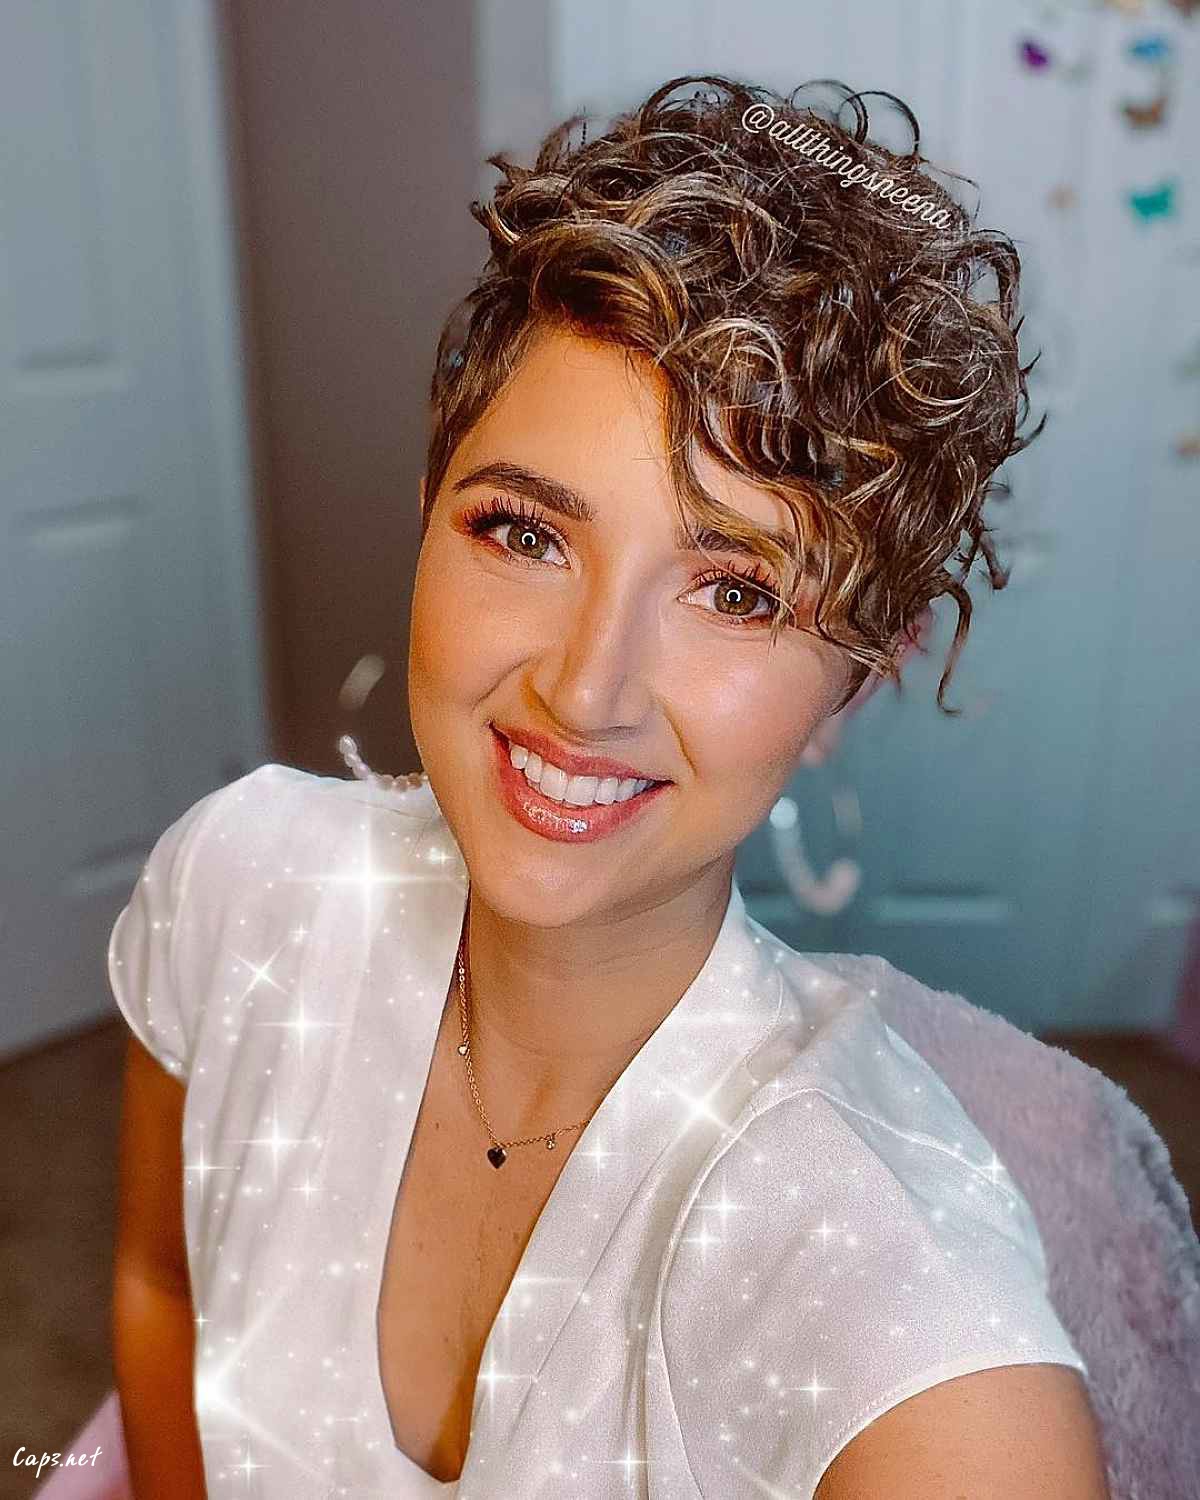 pixie cut for messy curly hair